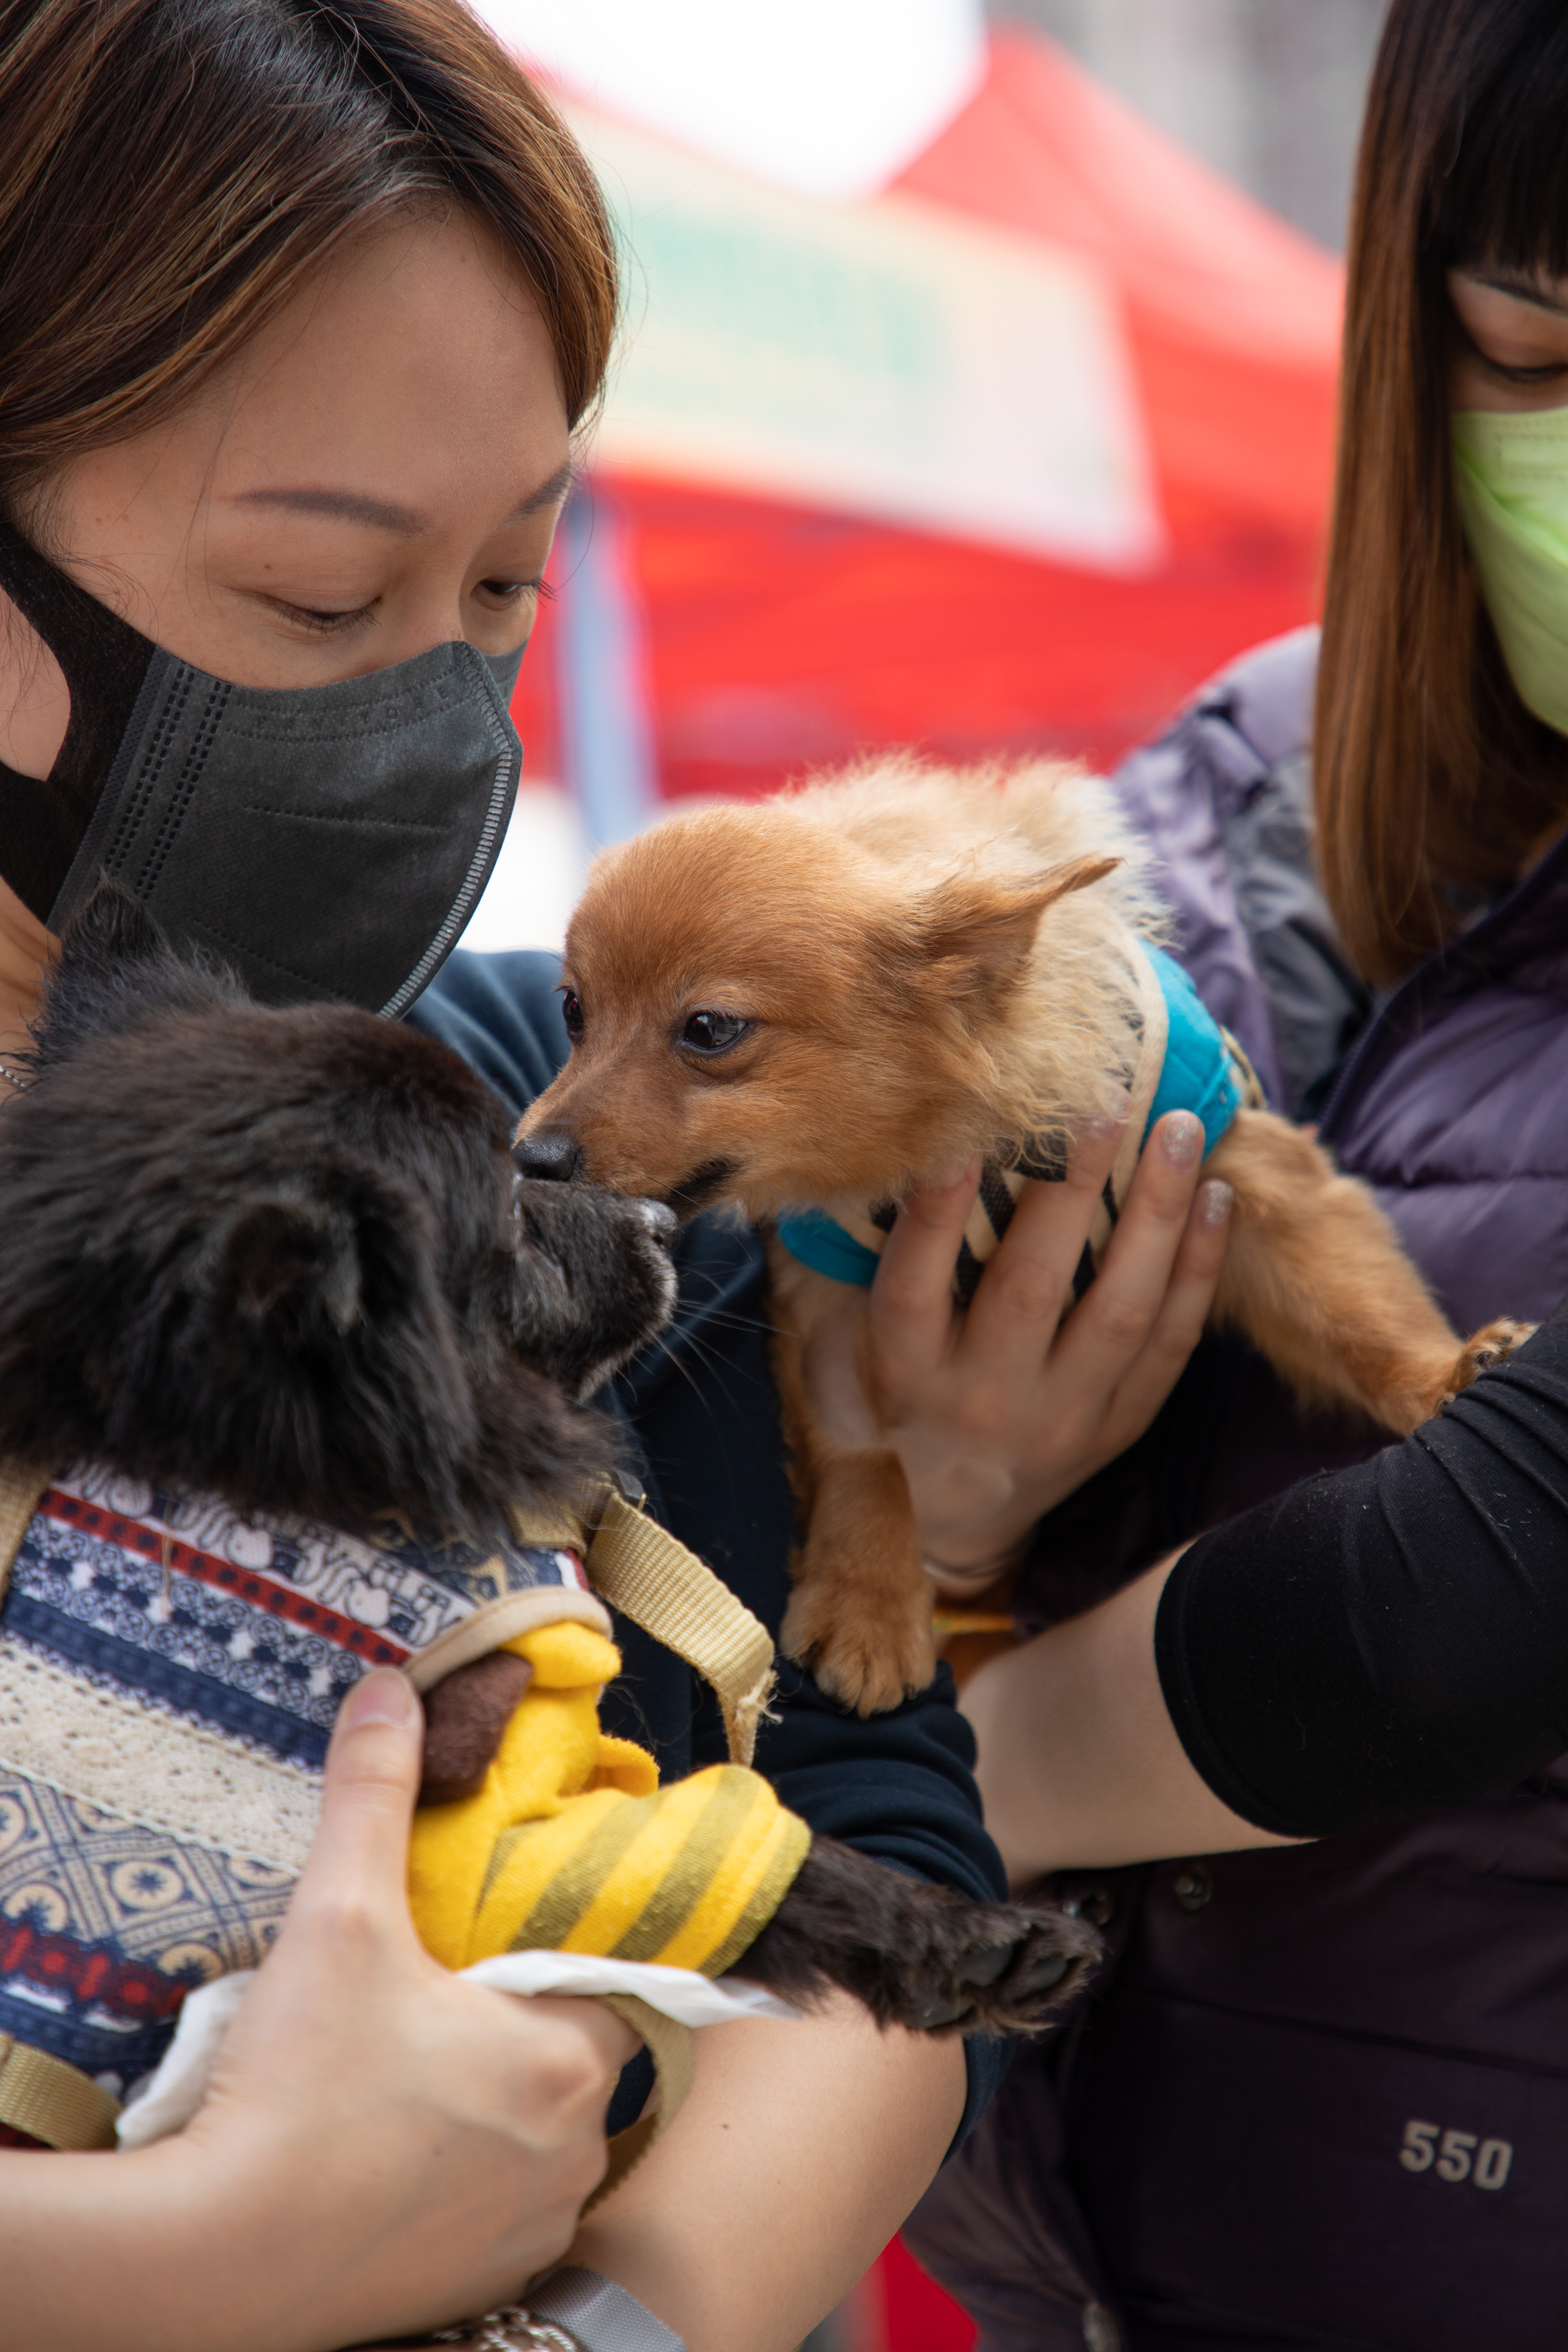 The Carnival provided a great opportunity for dogs to socialise and interact with each other.